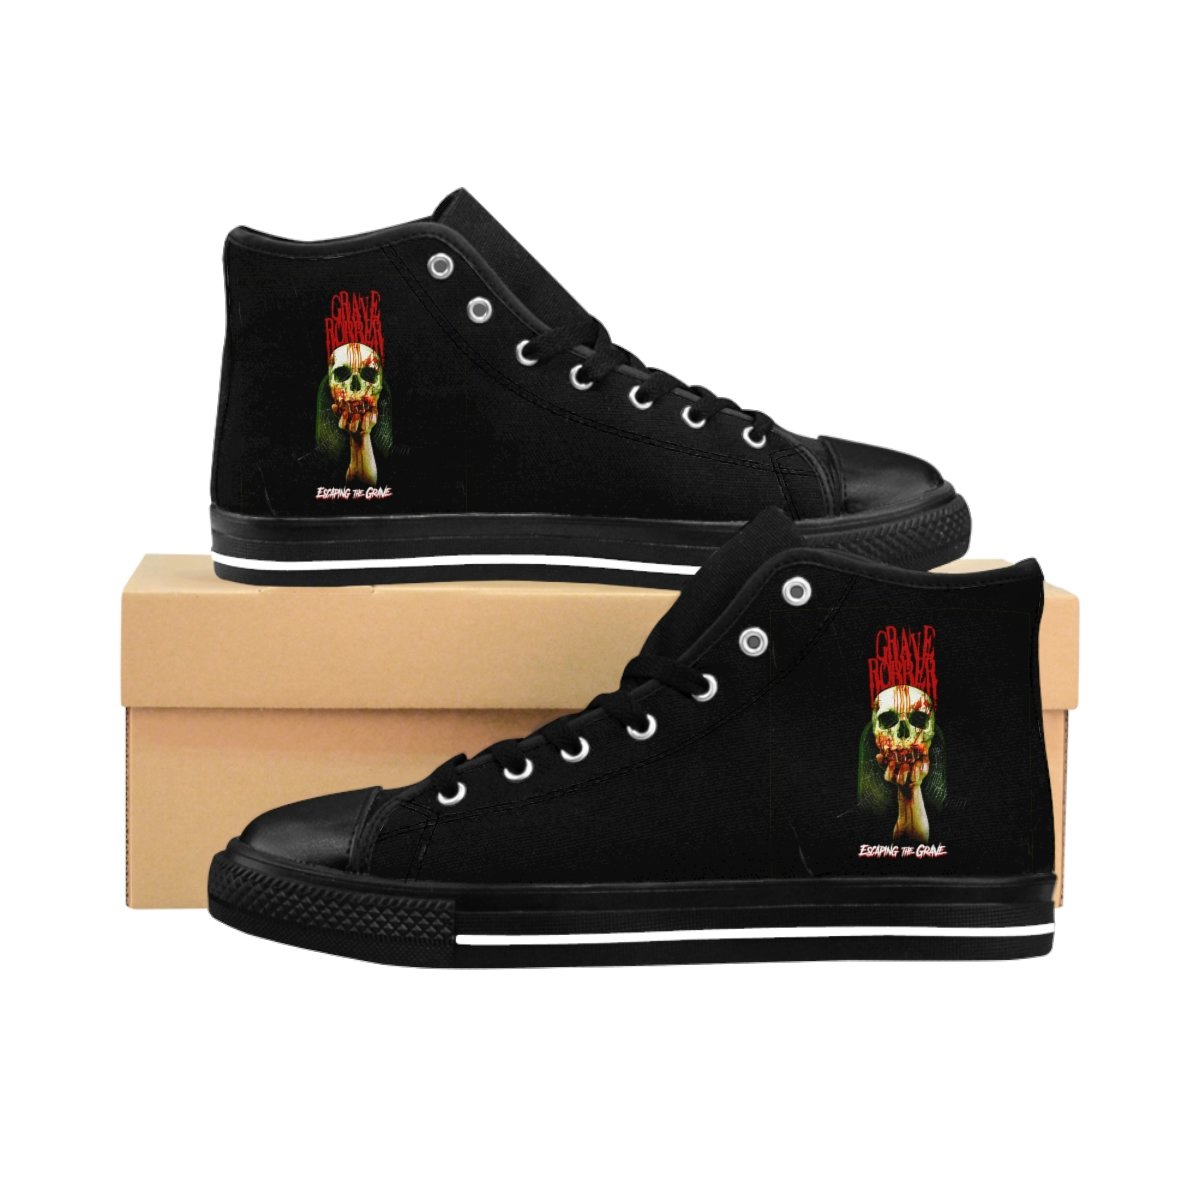 Grave Robber Escaping the Grave Men’s High-top Sneakers